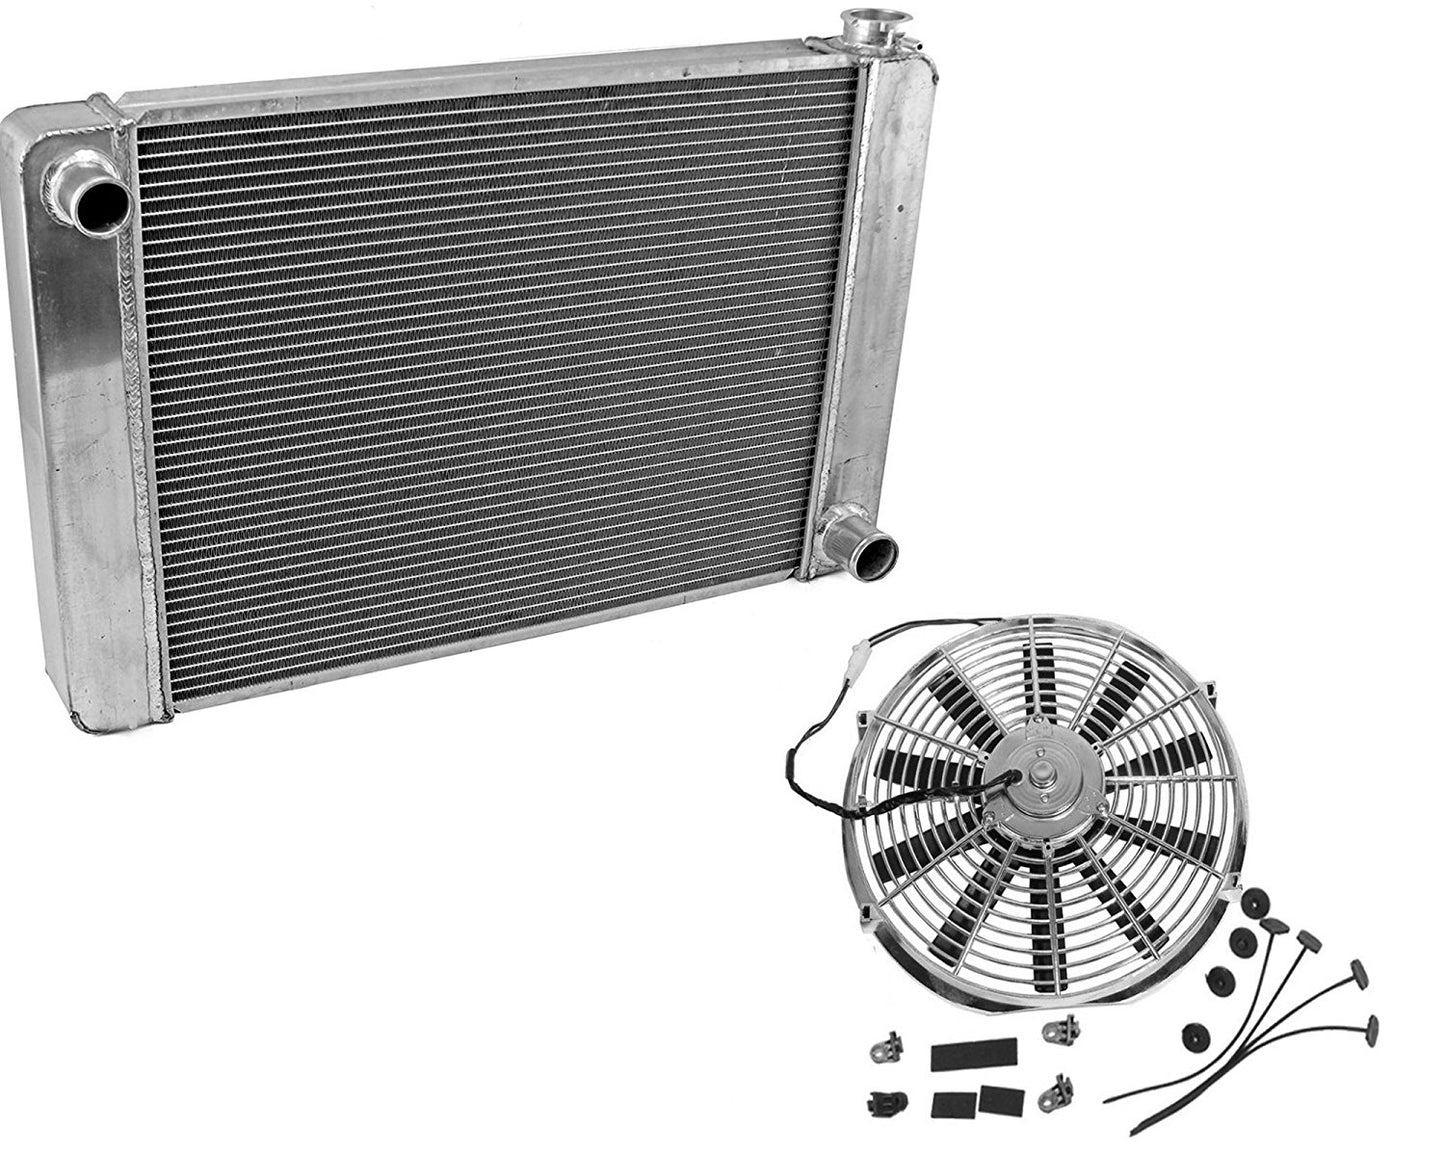 Fabricated Aluminum Radiator 24" x 19" x 3" Overall For SBC BBC Chevy GM &16" Chrome Straight Blade Cooling Fan